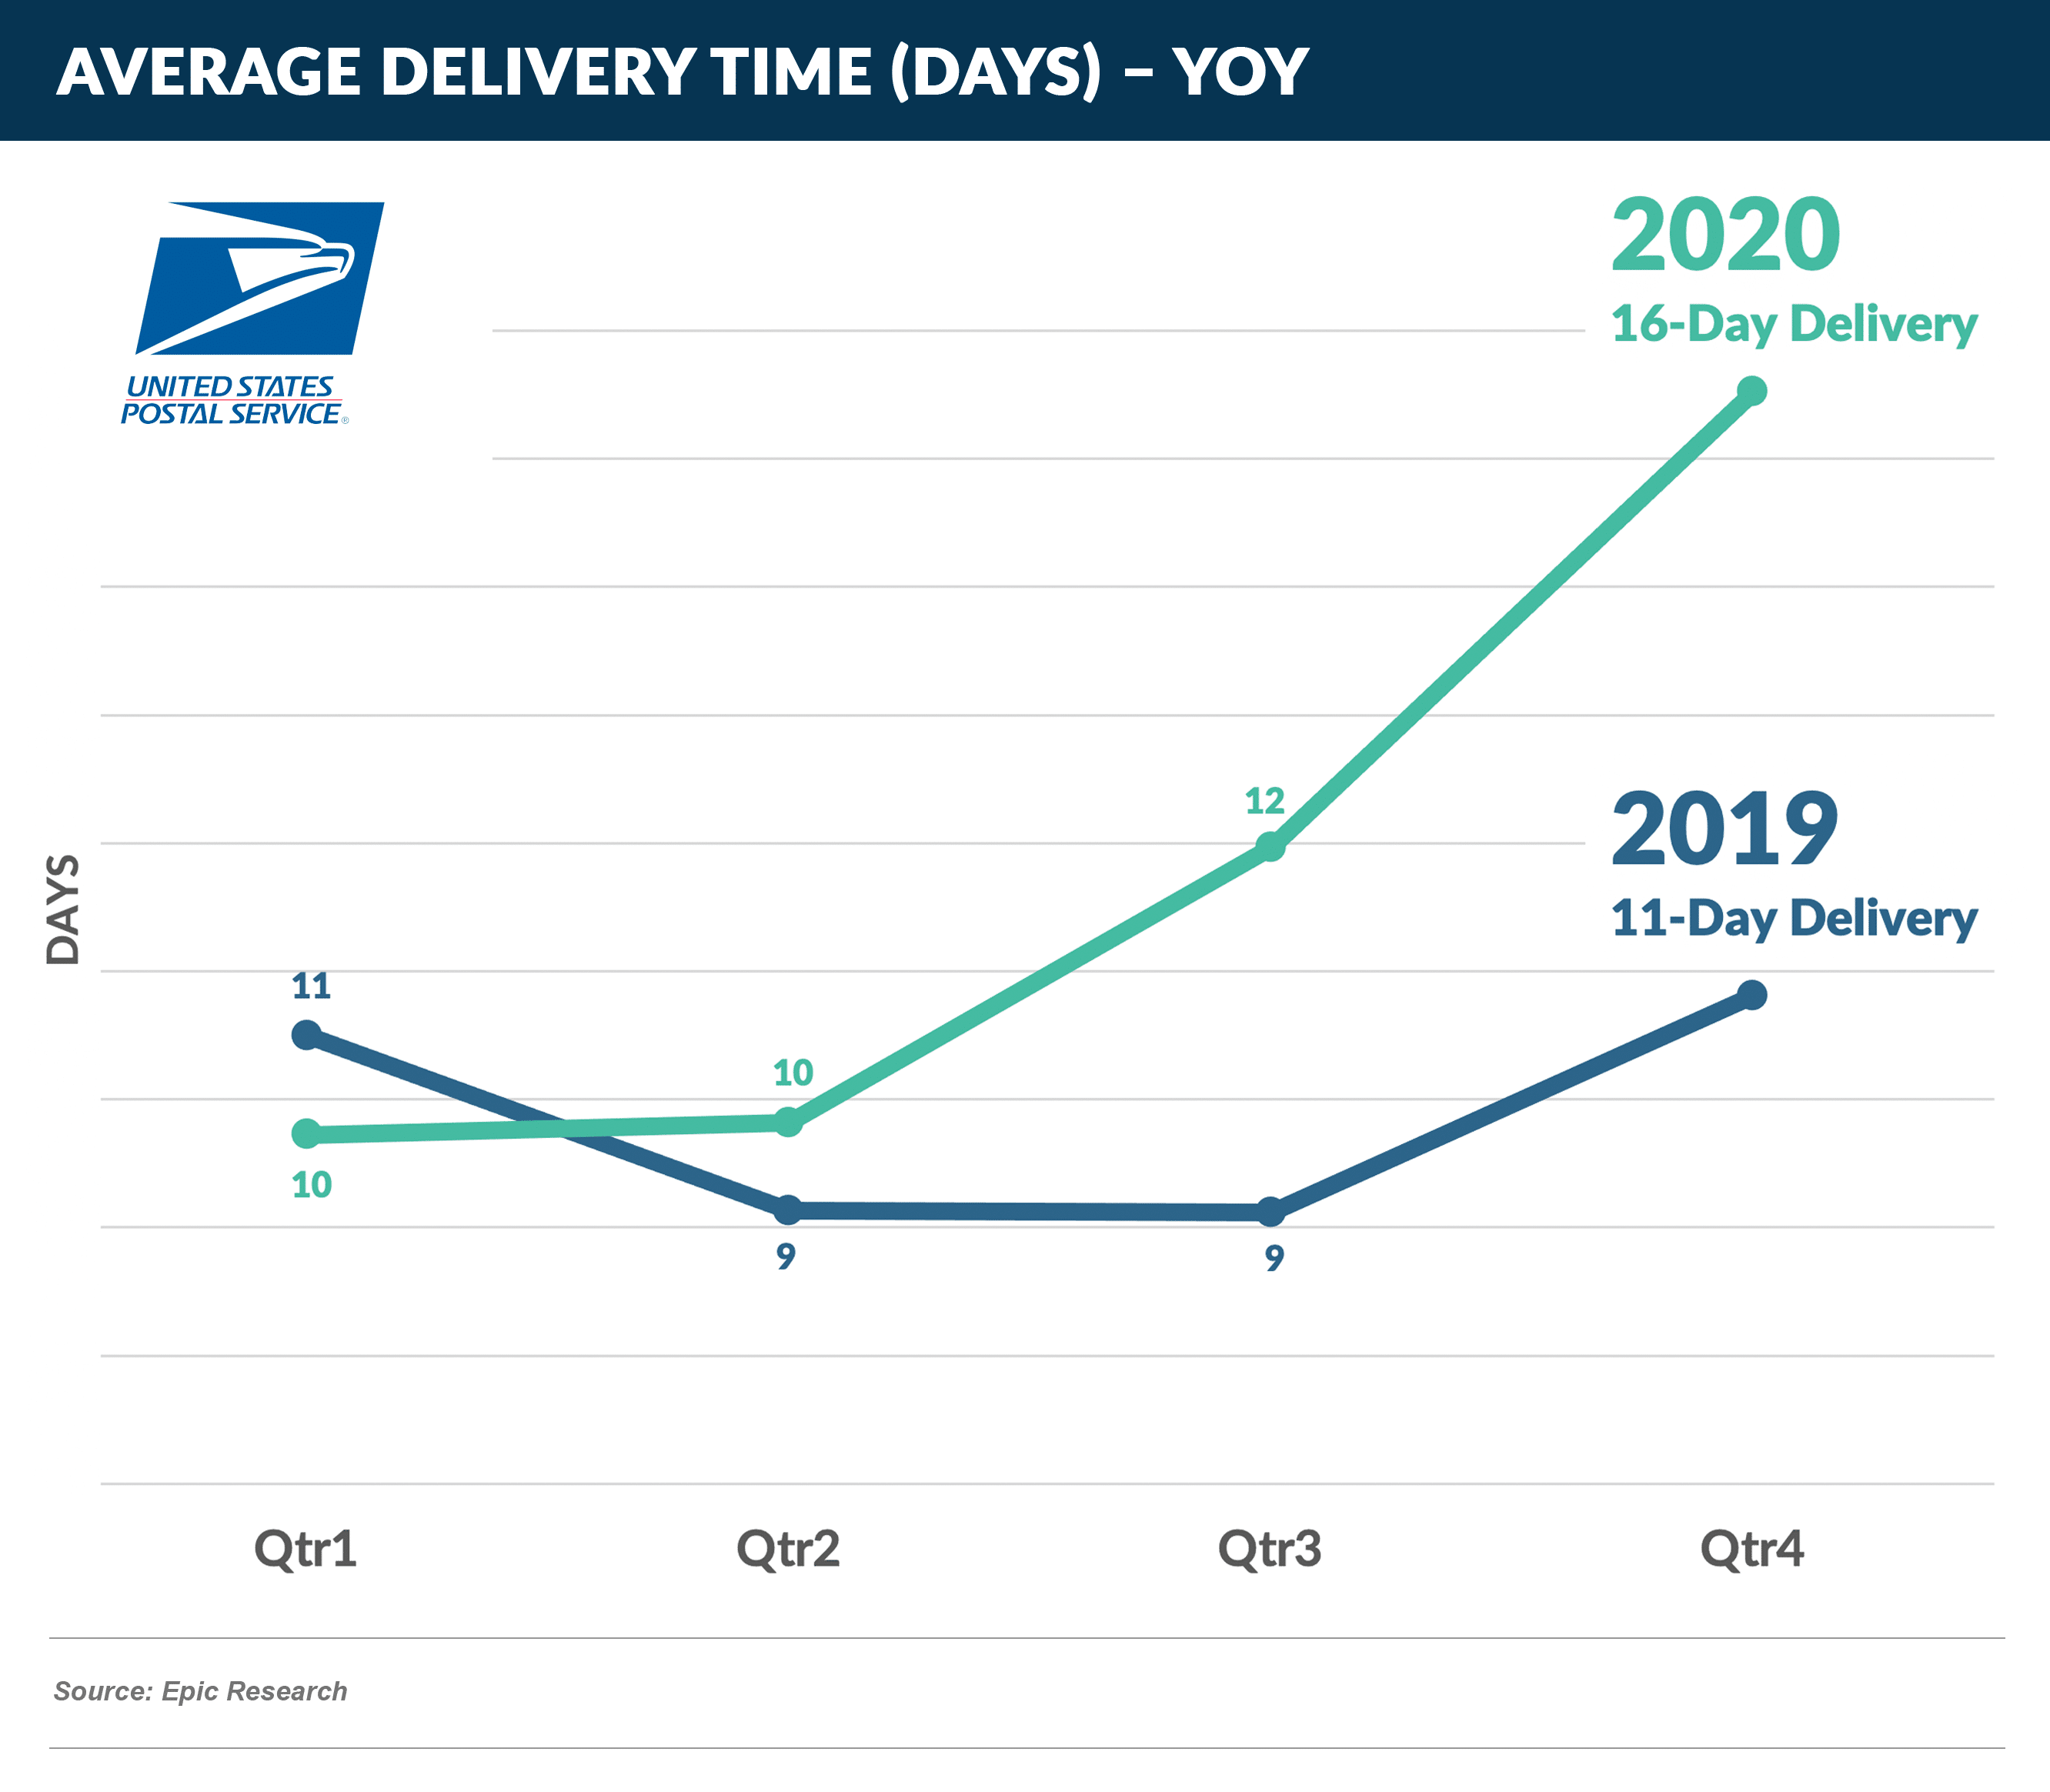 Average Delivery Time (Days) – Client Average YOY